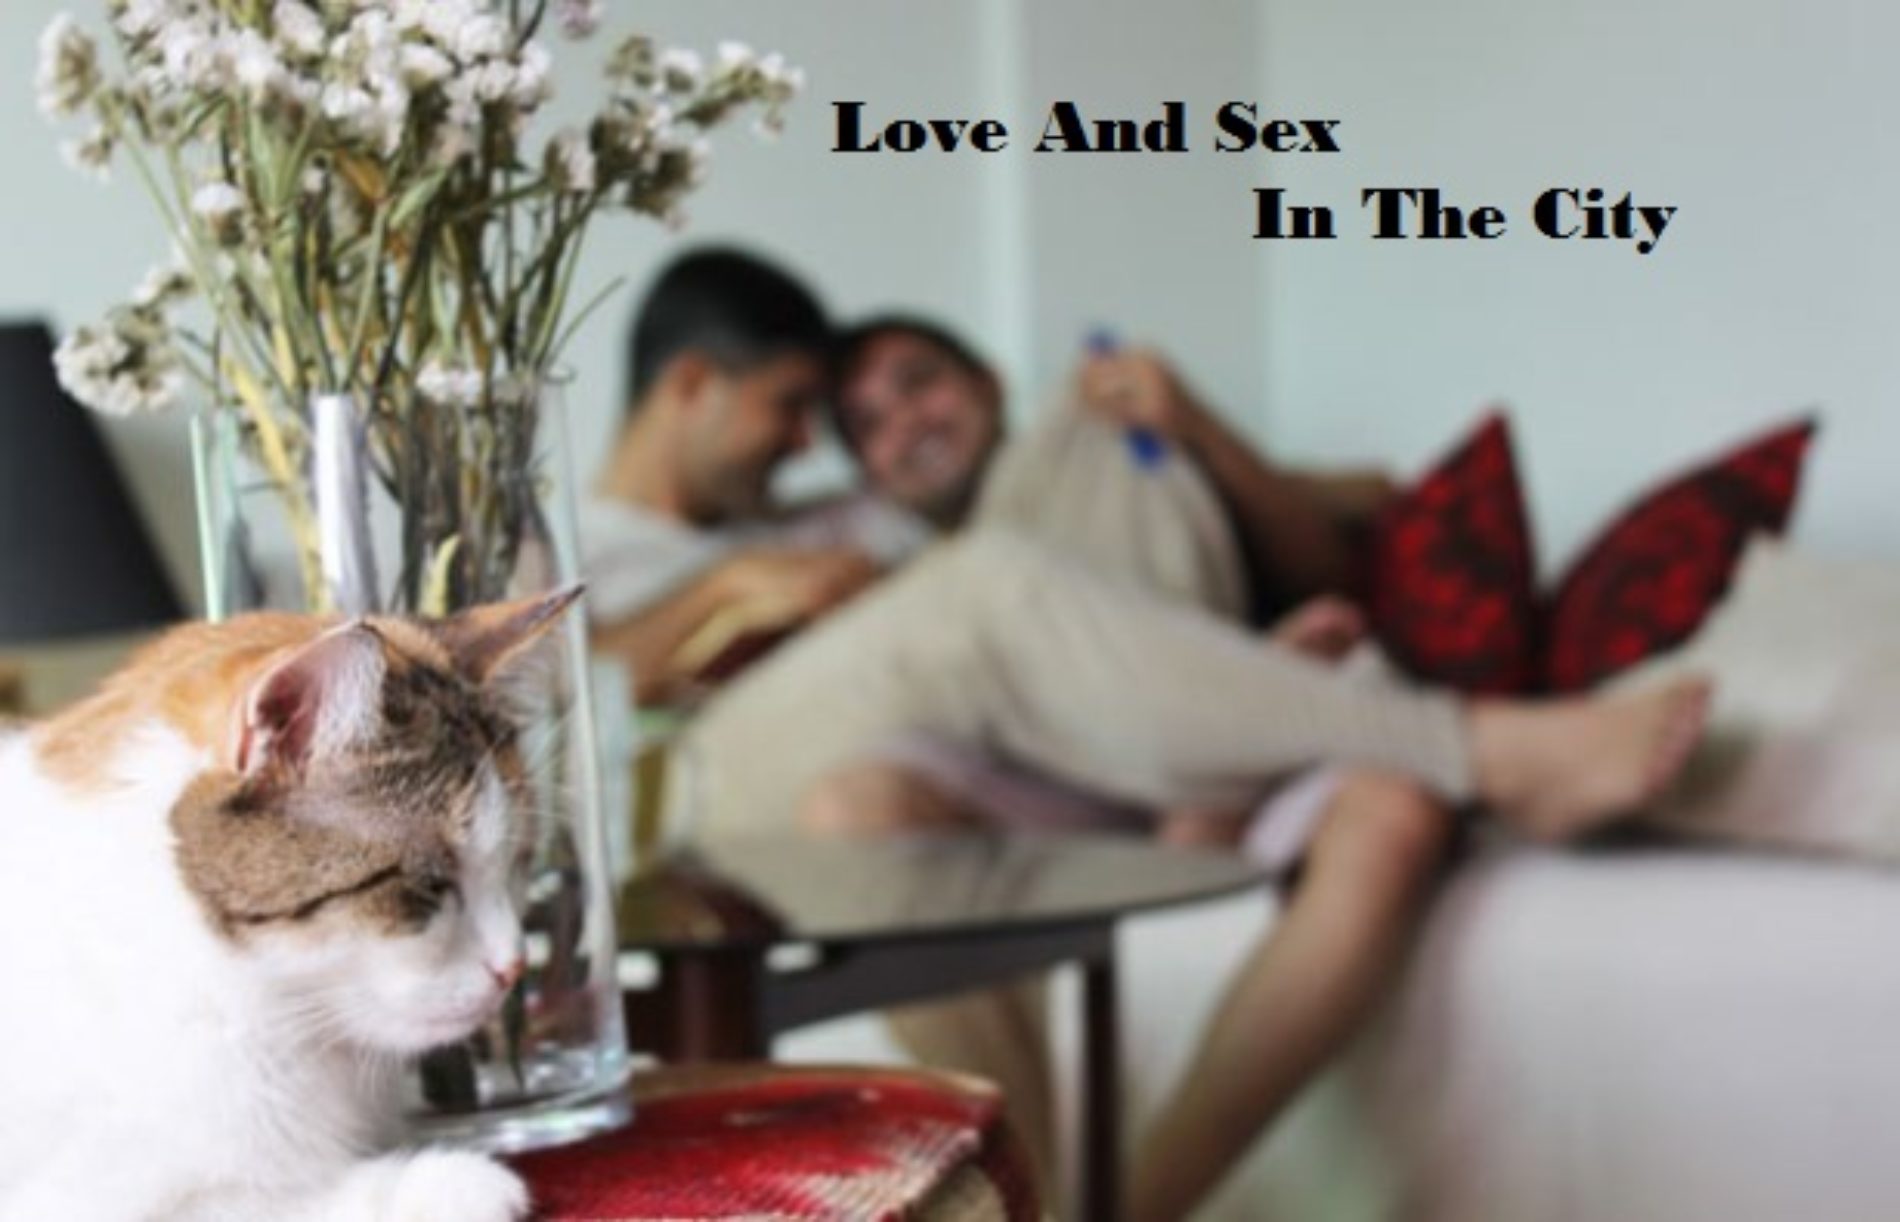 LOVE AND SEX IN THE CITY (Episode 45)